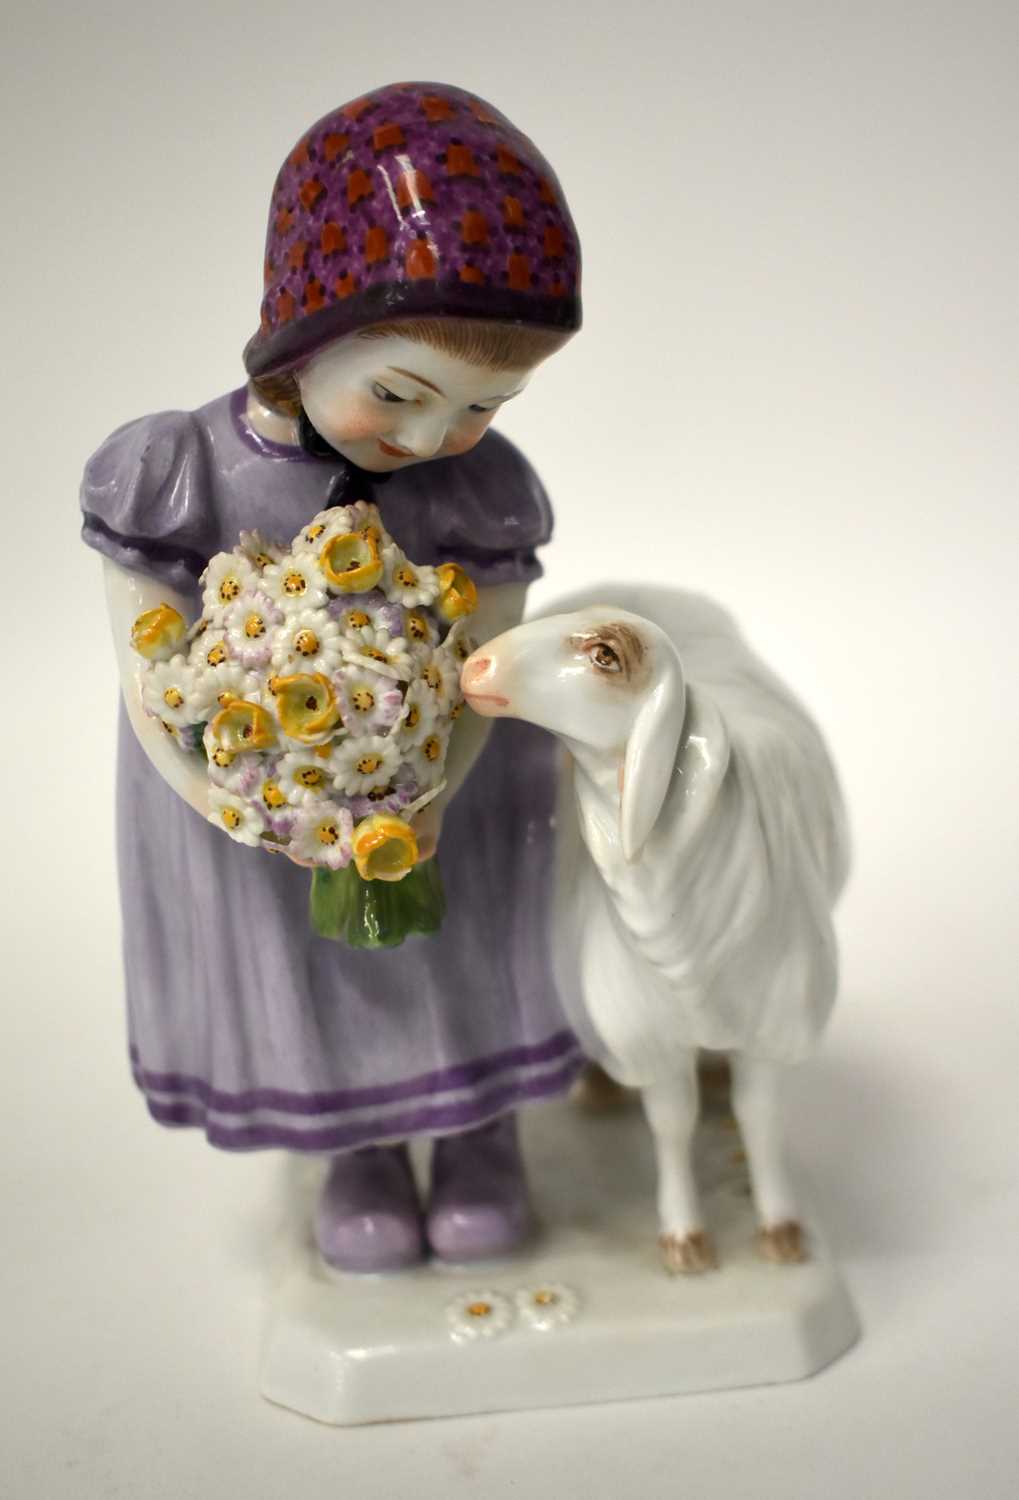 AN UNUSUAL GERMAN MEISSEN PORCELAIN GROUP depicting a child and a young goat. 17 cm high. - Image 9 of 18